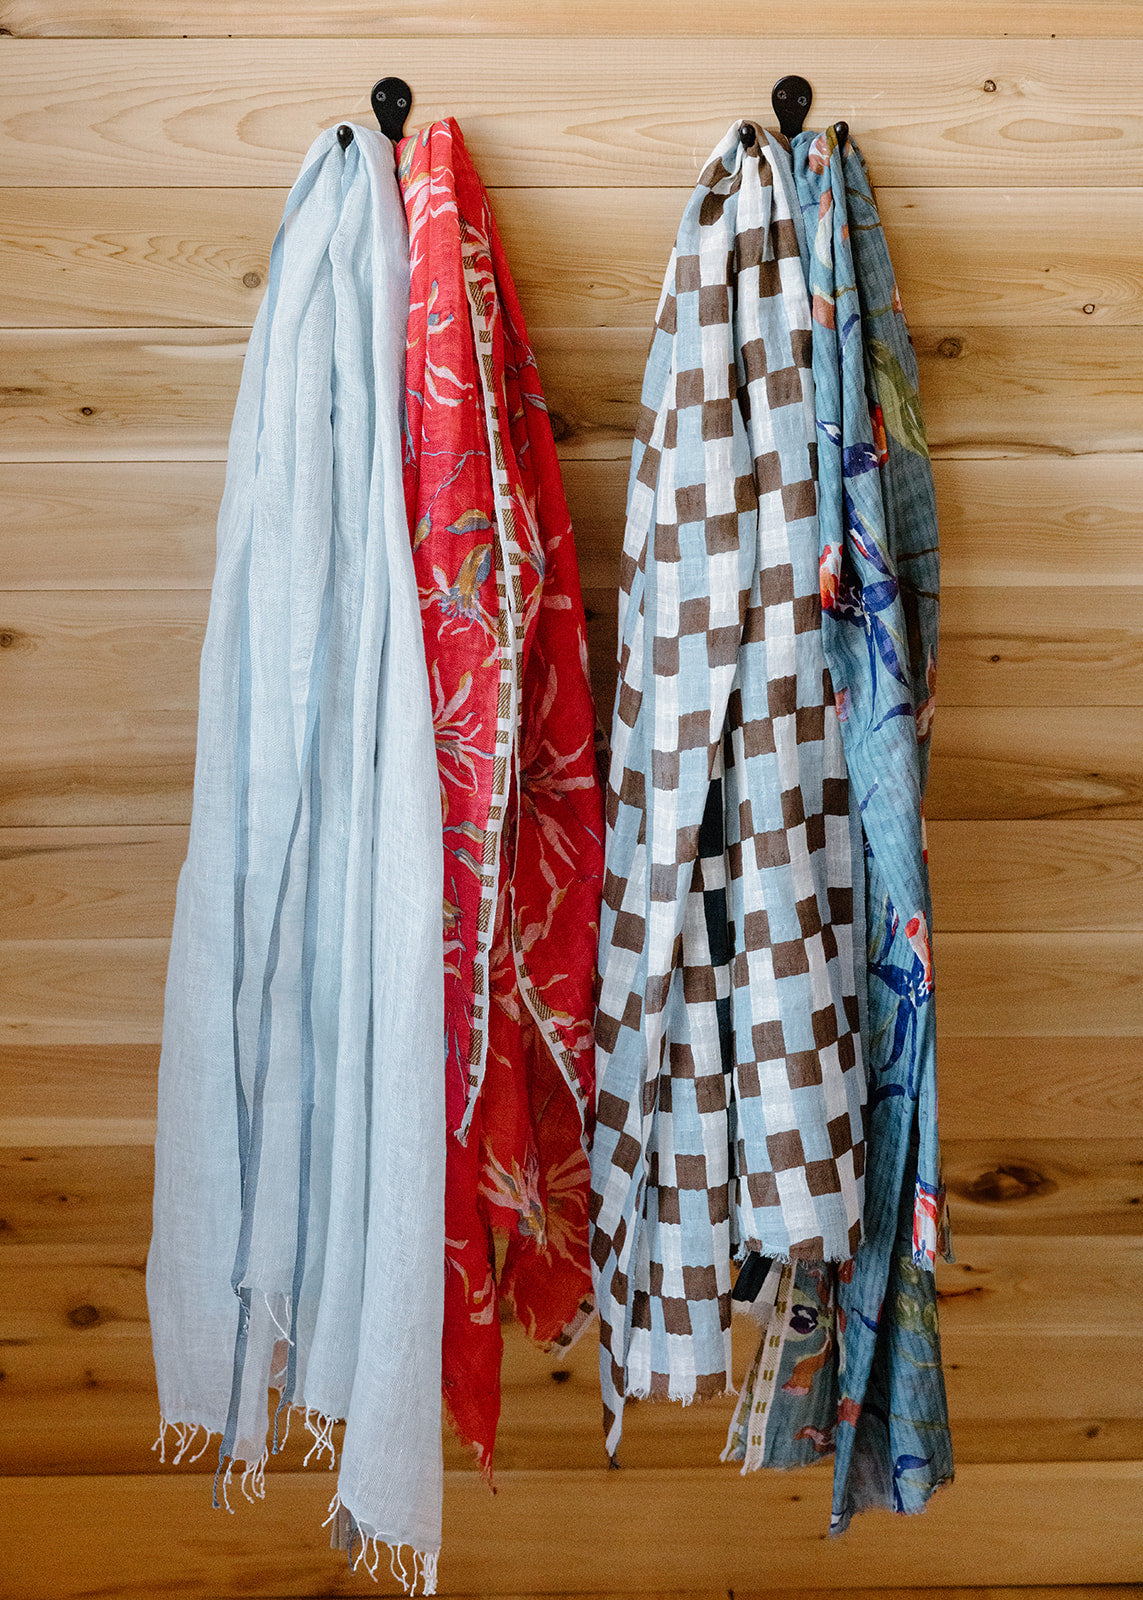 Four colorful scarves hanging on hooks against a wooden wall.